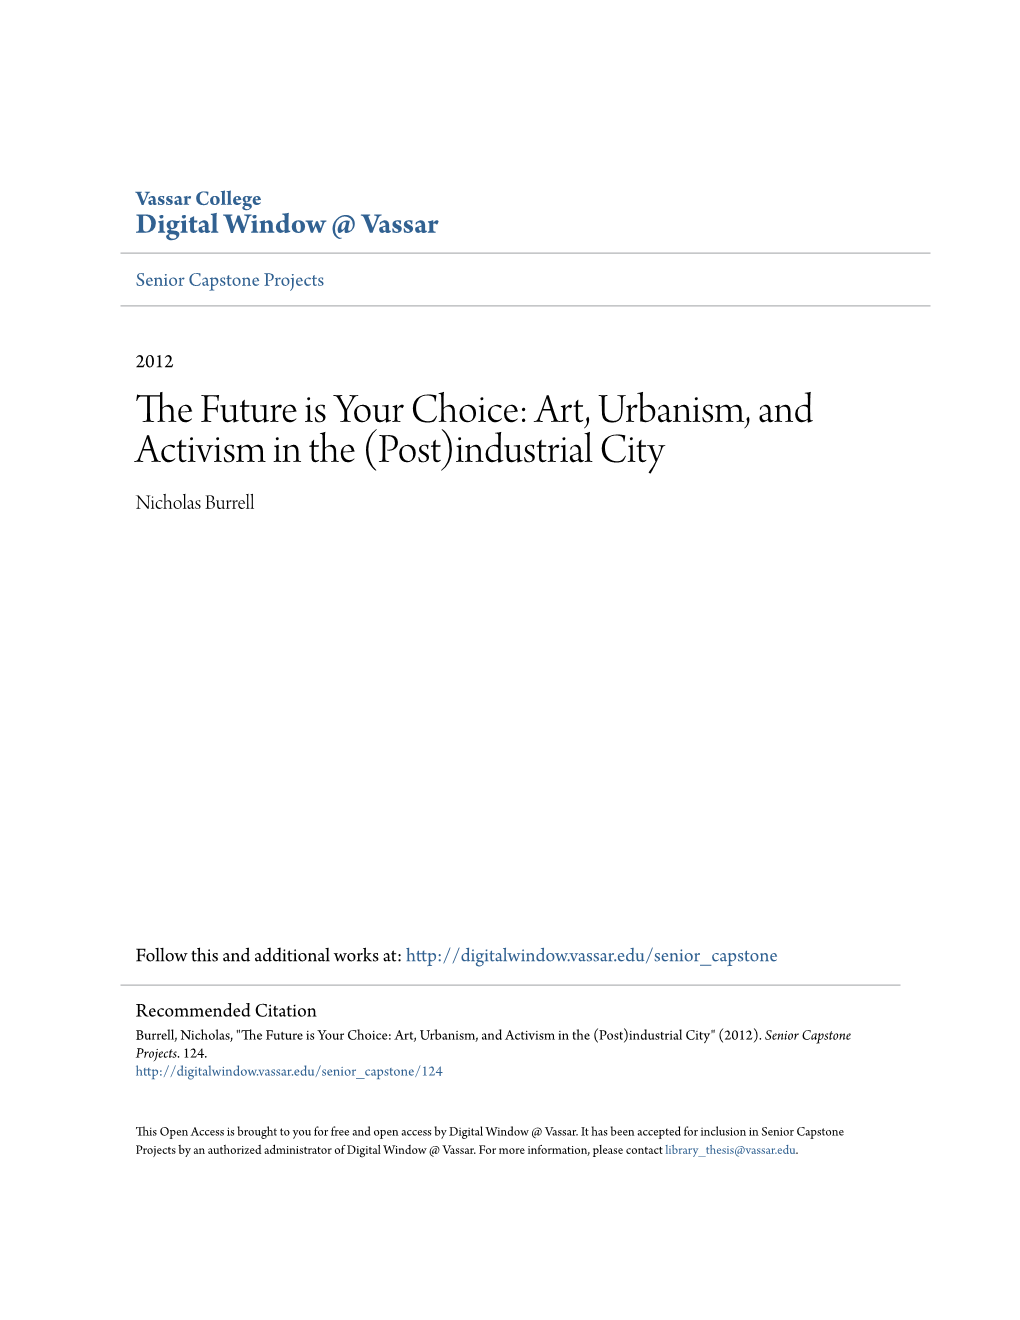 Art, Urbanism, and Activism in the (Post)Industrial City Nicholas Burrell